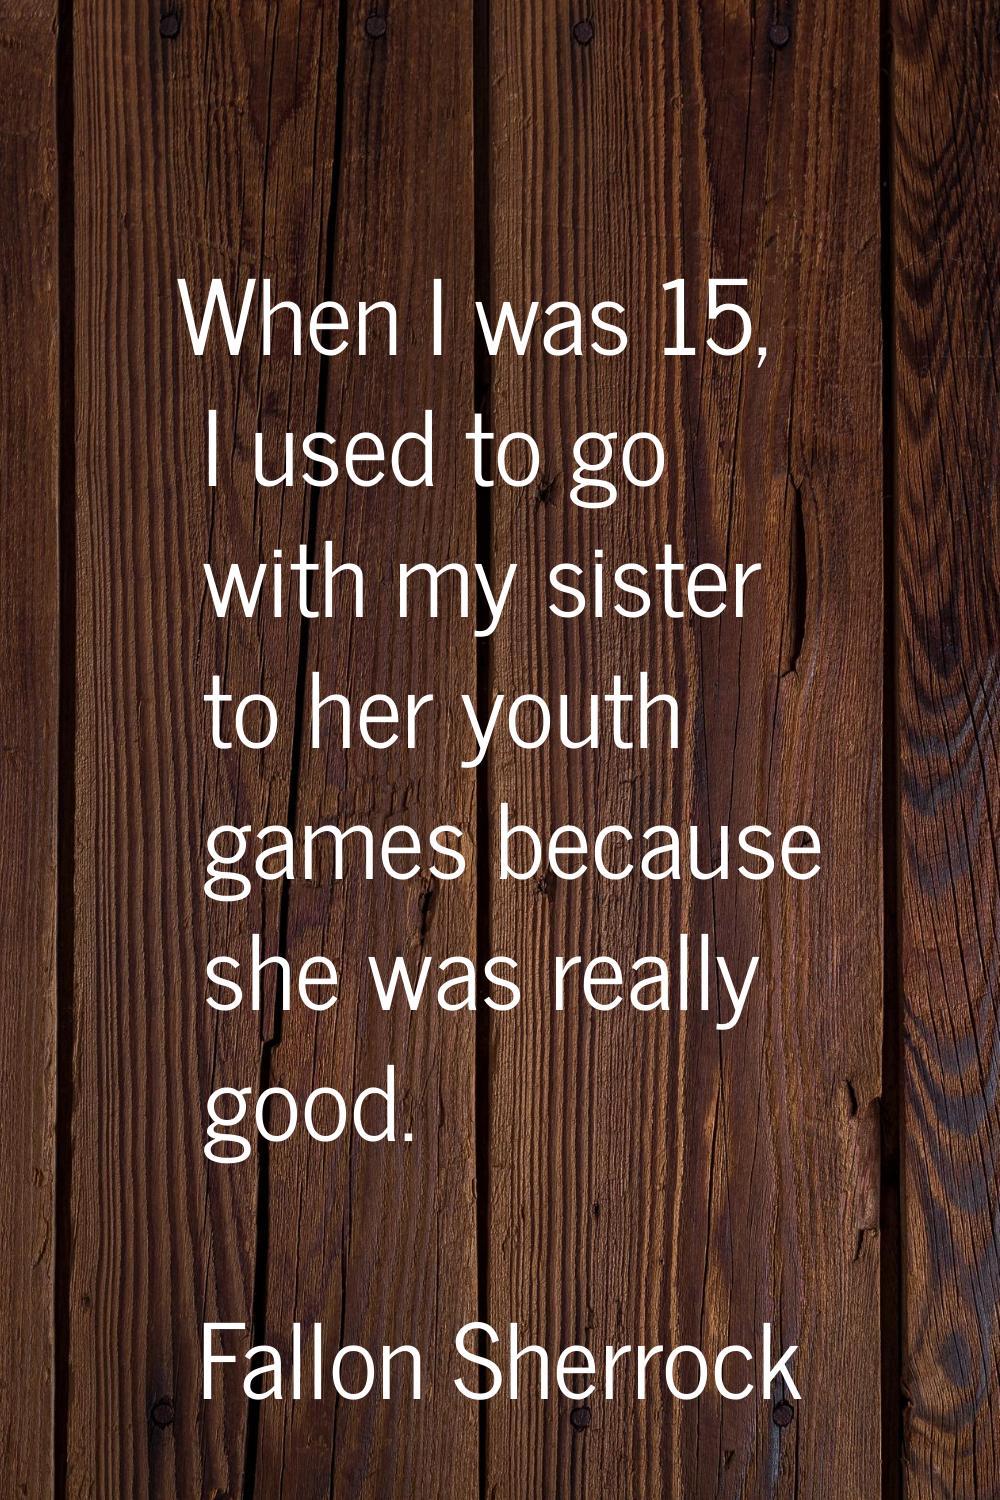 When I was 15, I used to go with my sister to her youth games because she was really good.